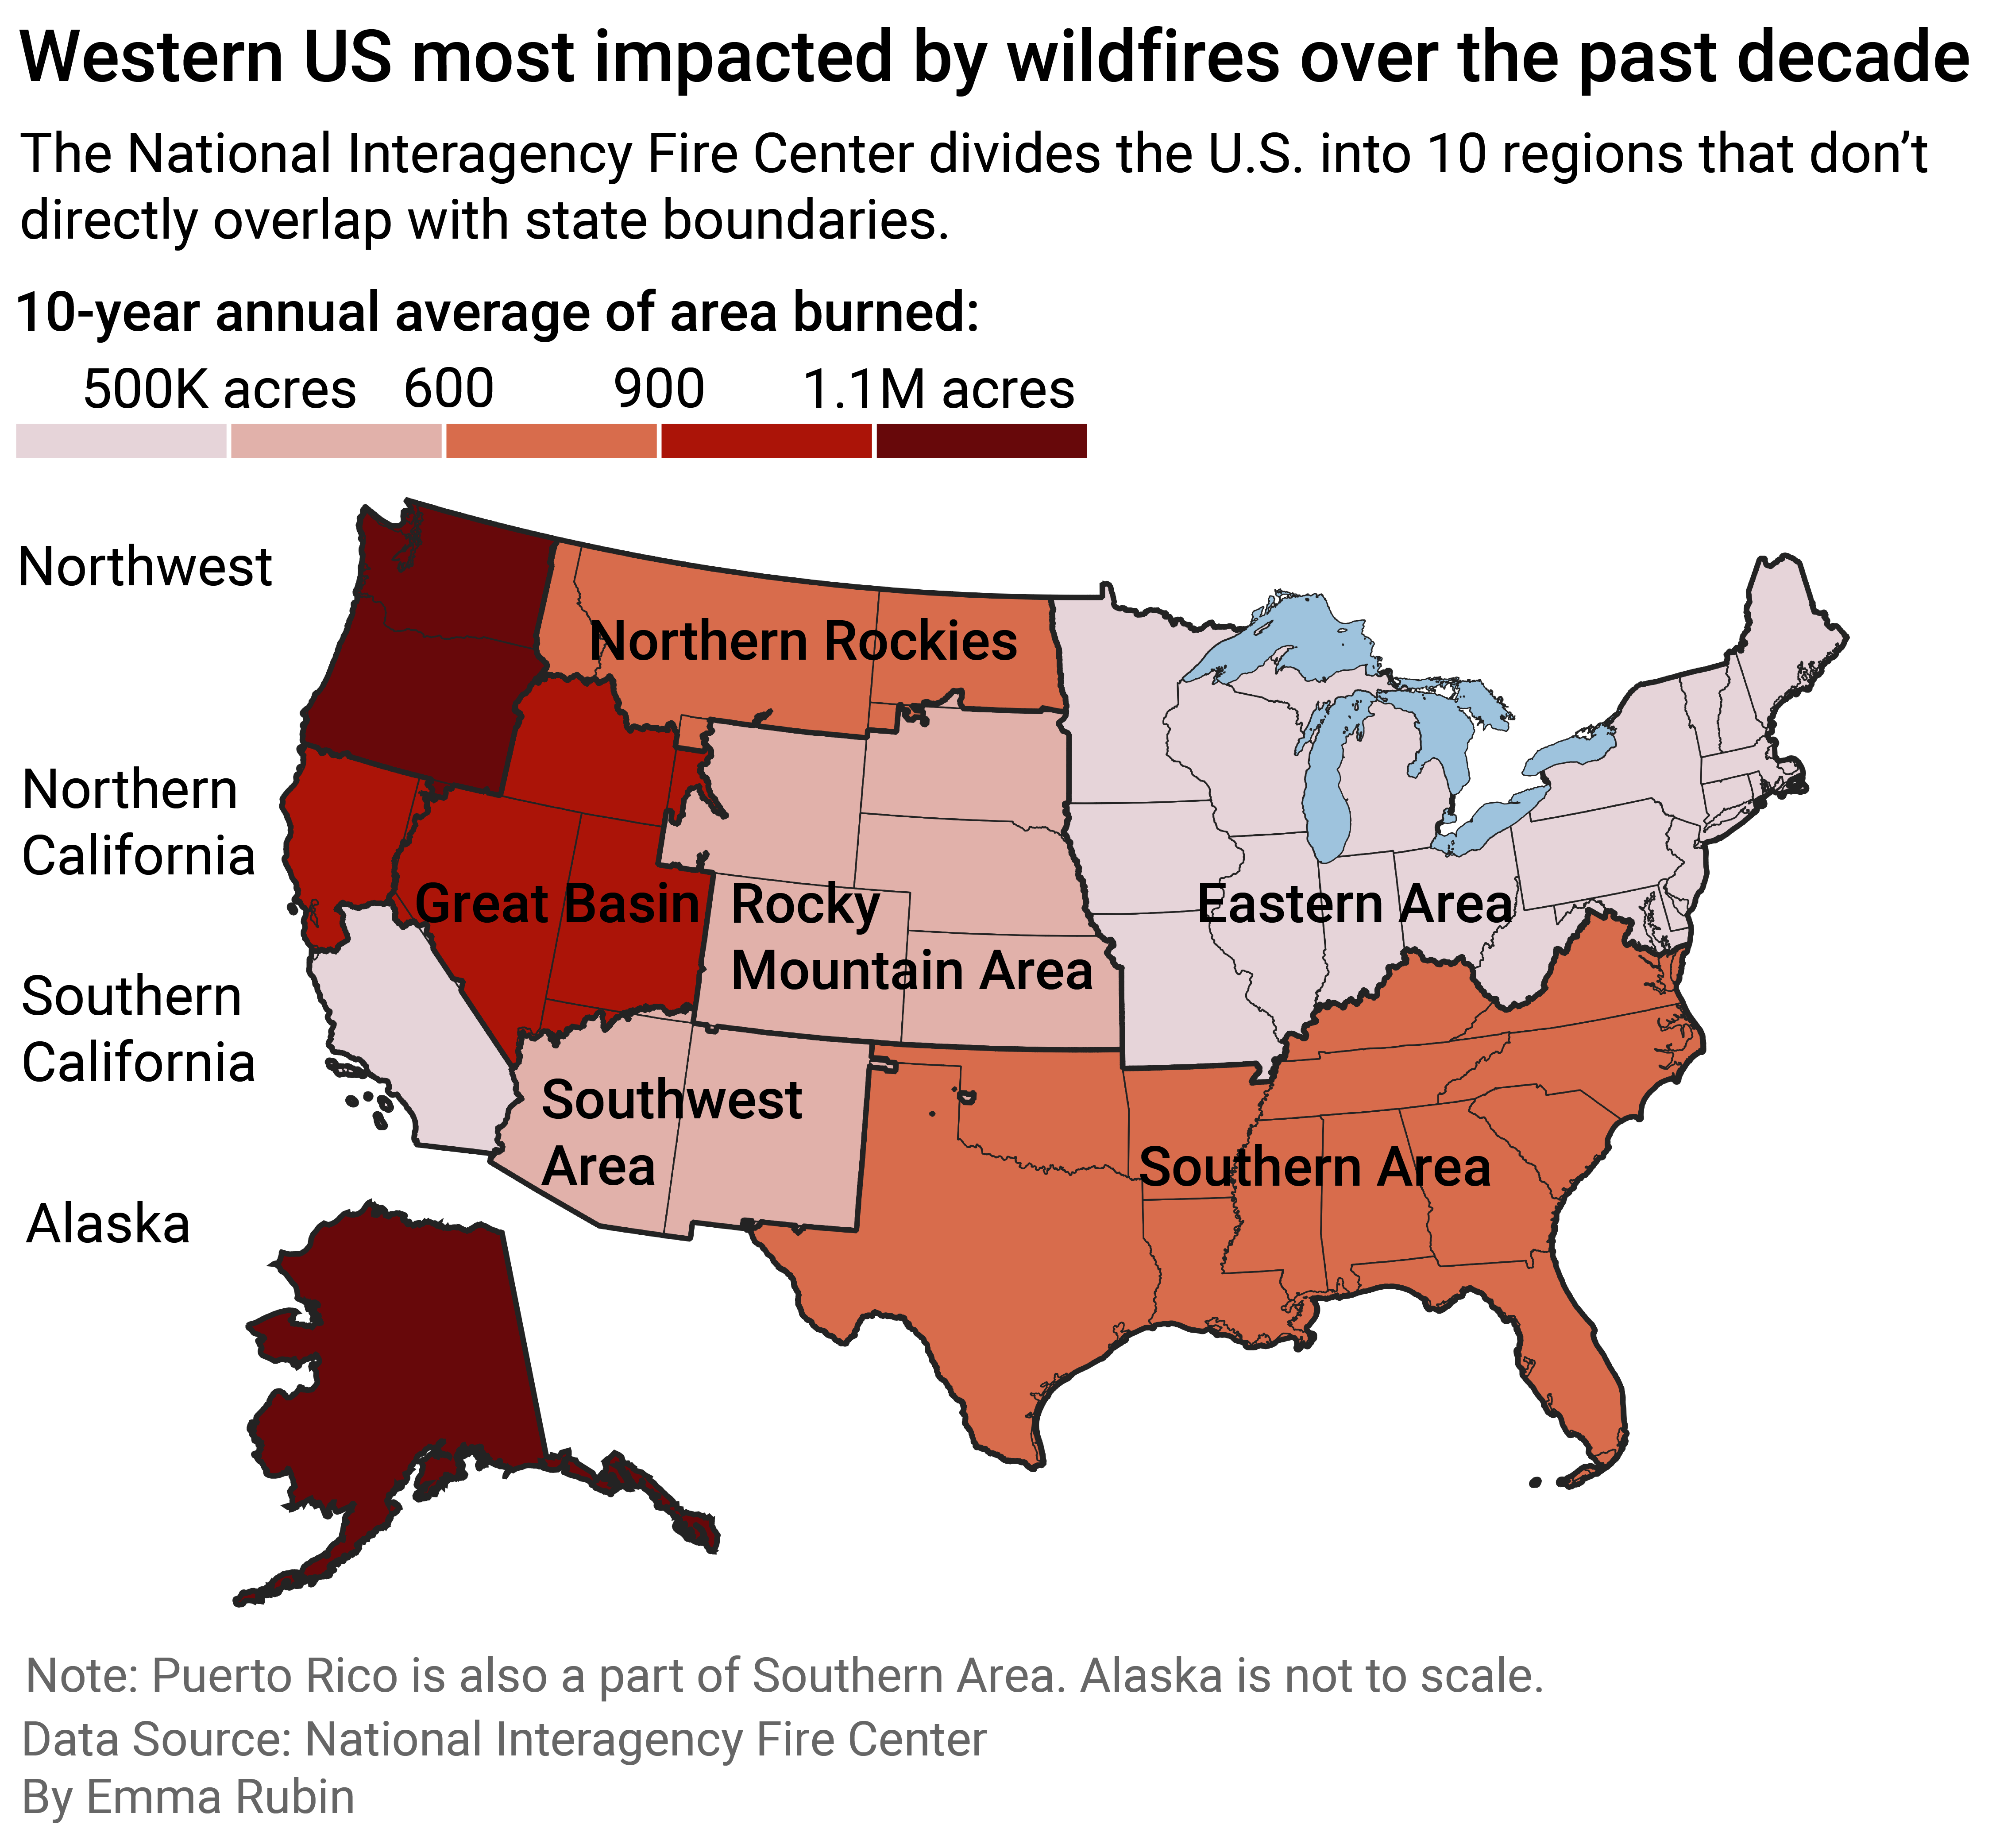 Map showing western US reports the most wildfire damage based on acres burned over the past decade. Fire regions do not directly line up with state boundaries.